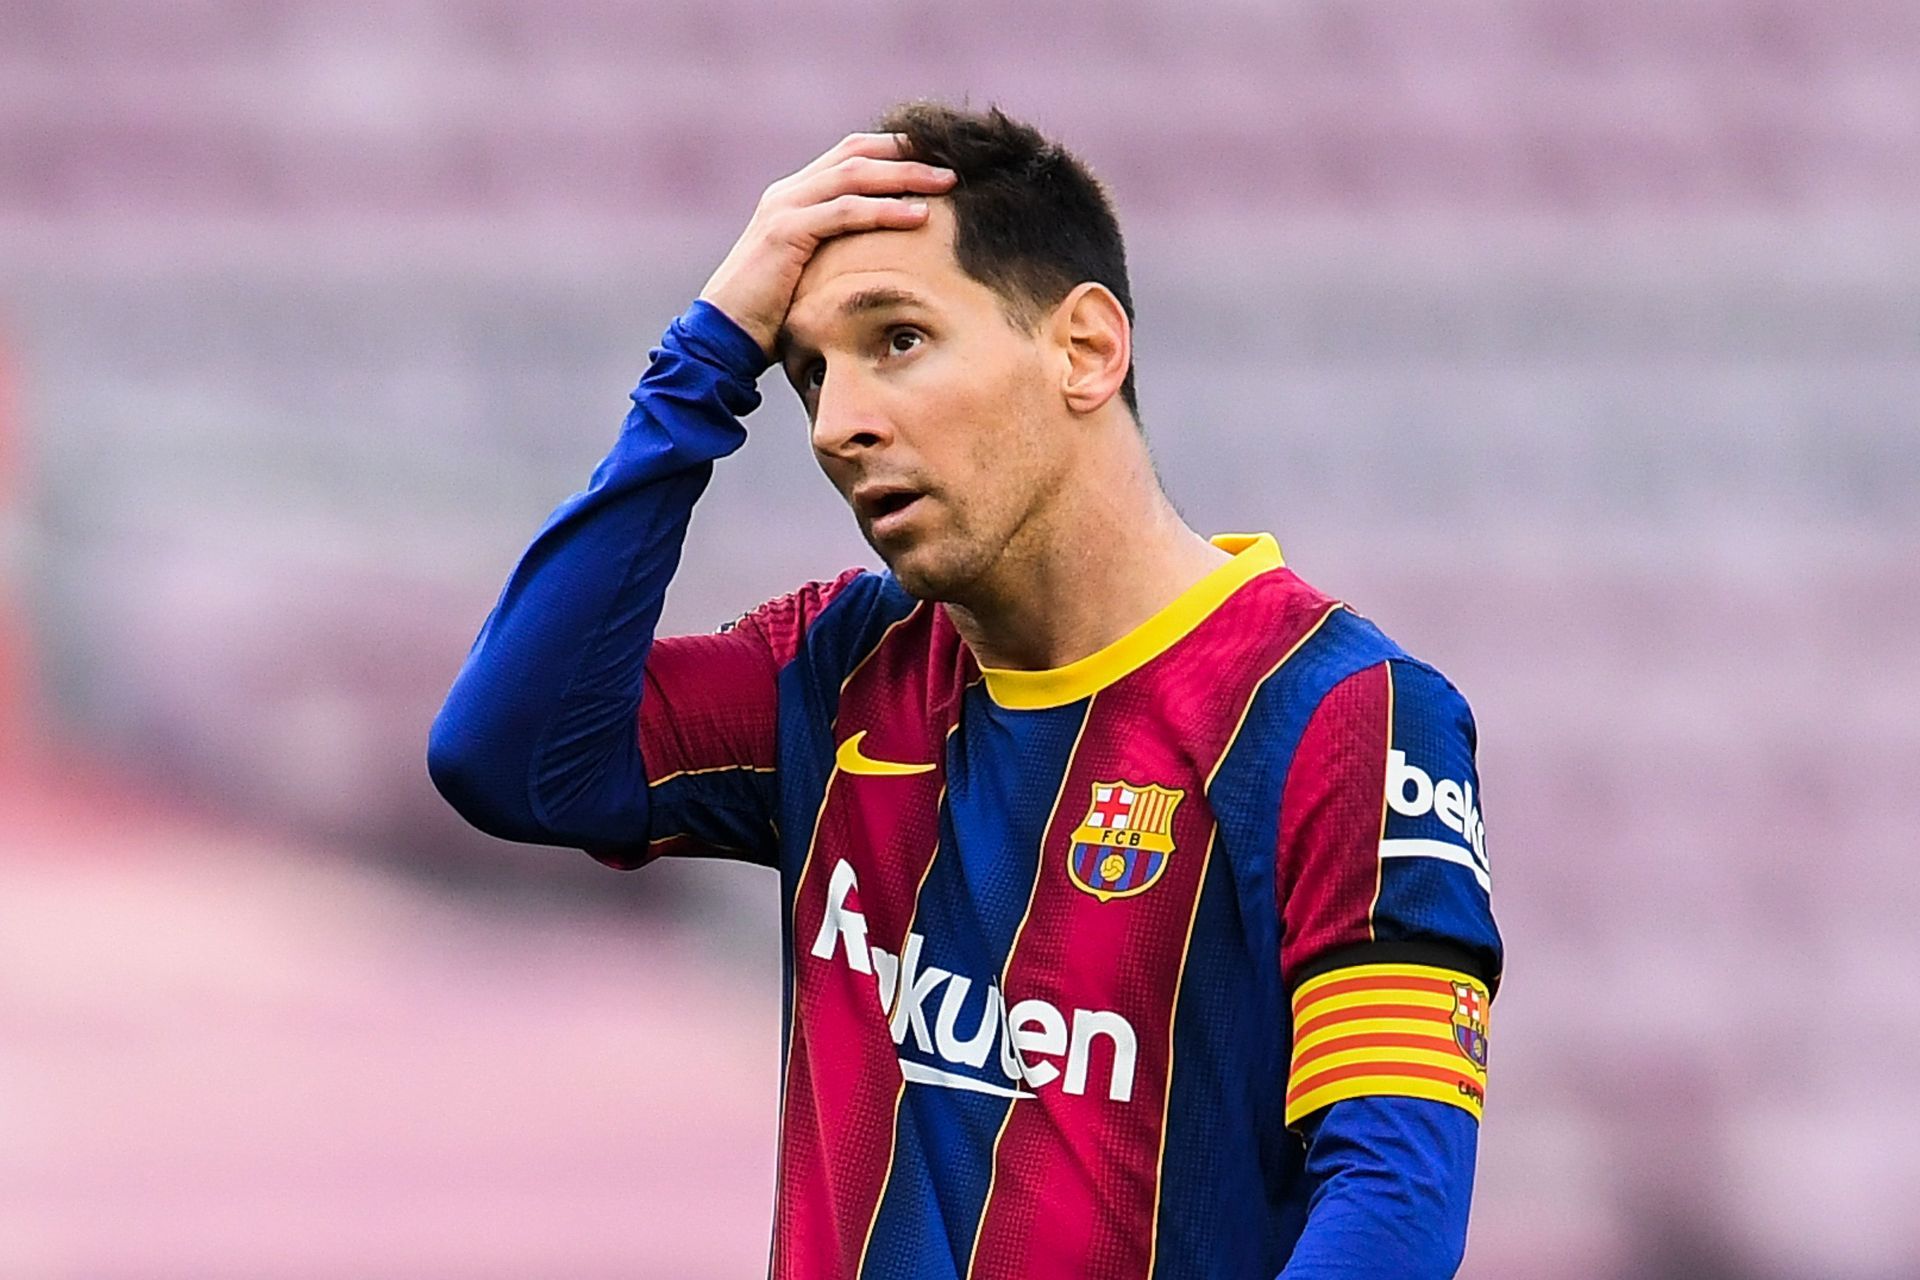 Lionel Messi spent a whopping 21 years at Barcelona